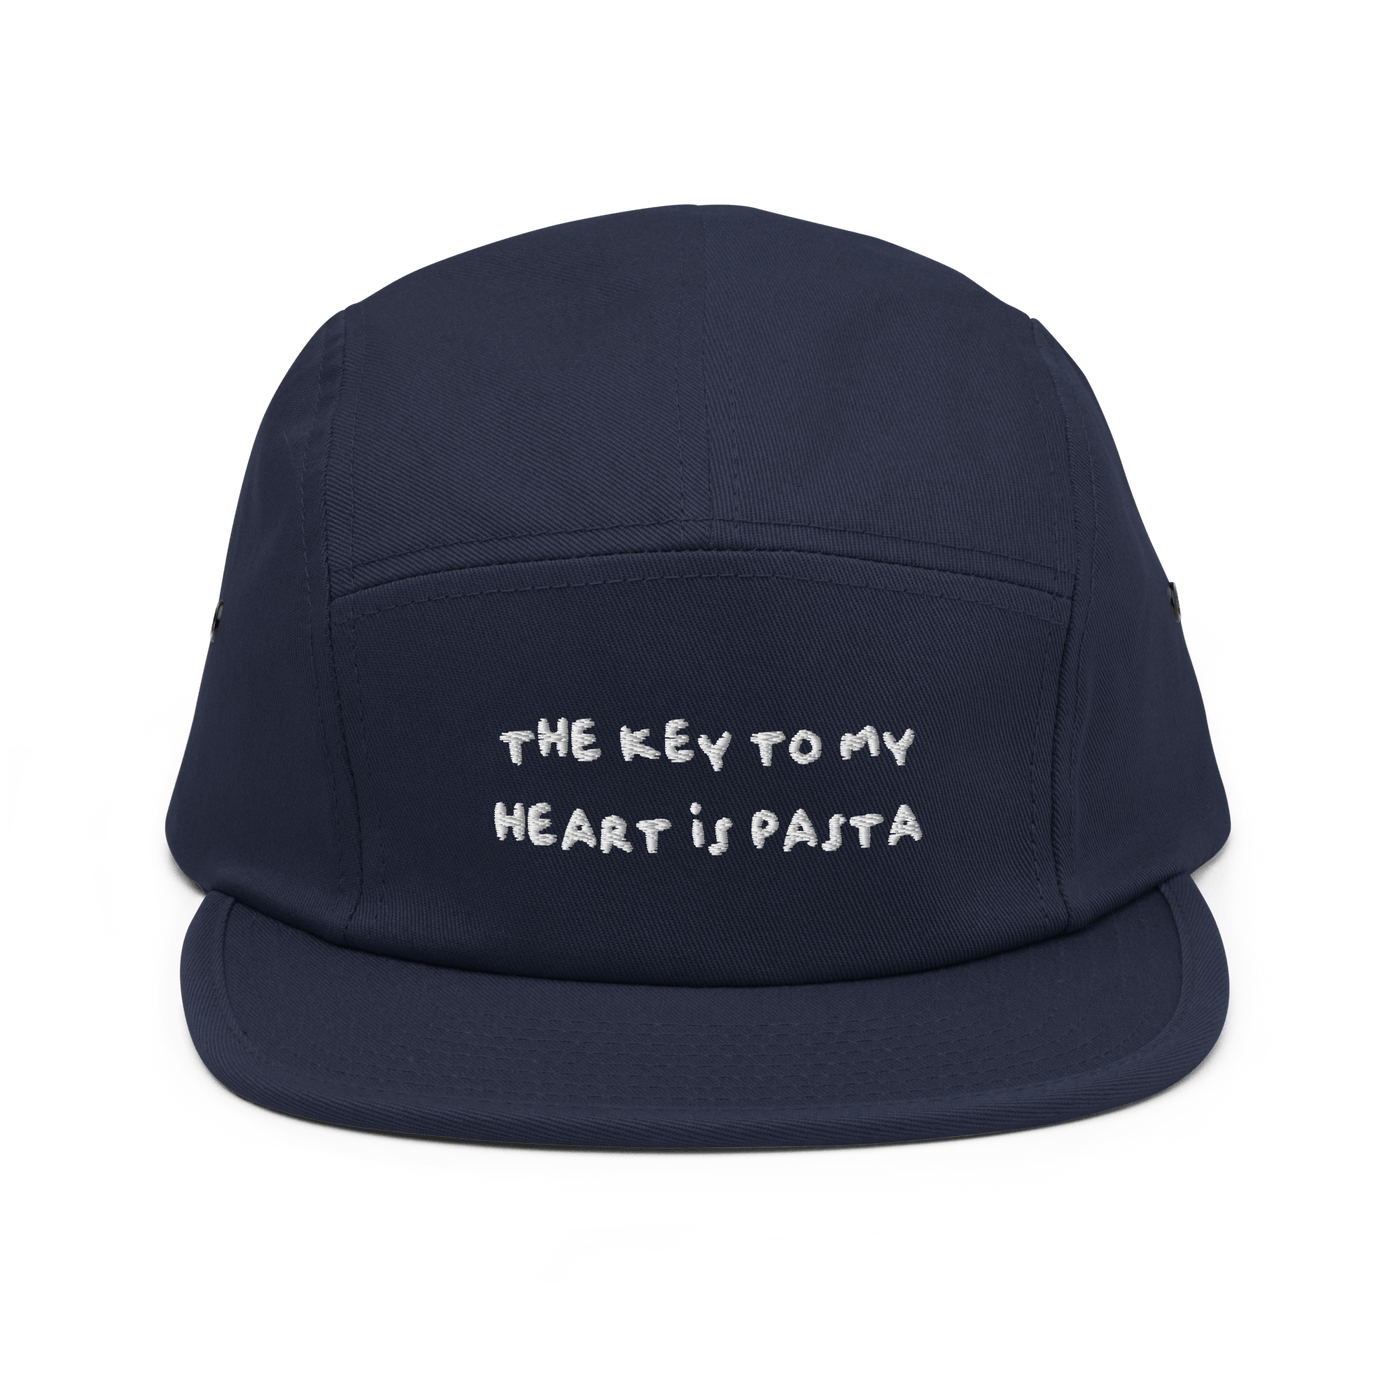 The key to my heart is Pasta Five Panel Cap - Navy - - Just Another Cap Store